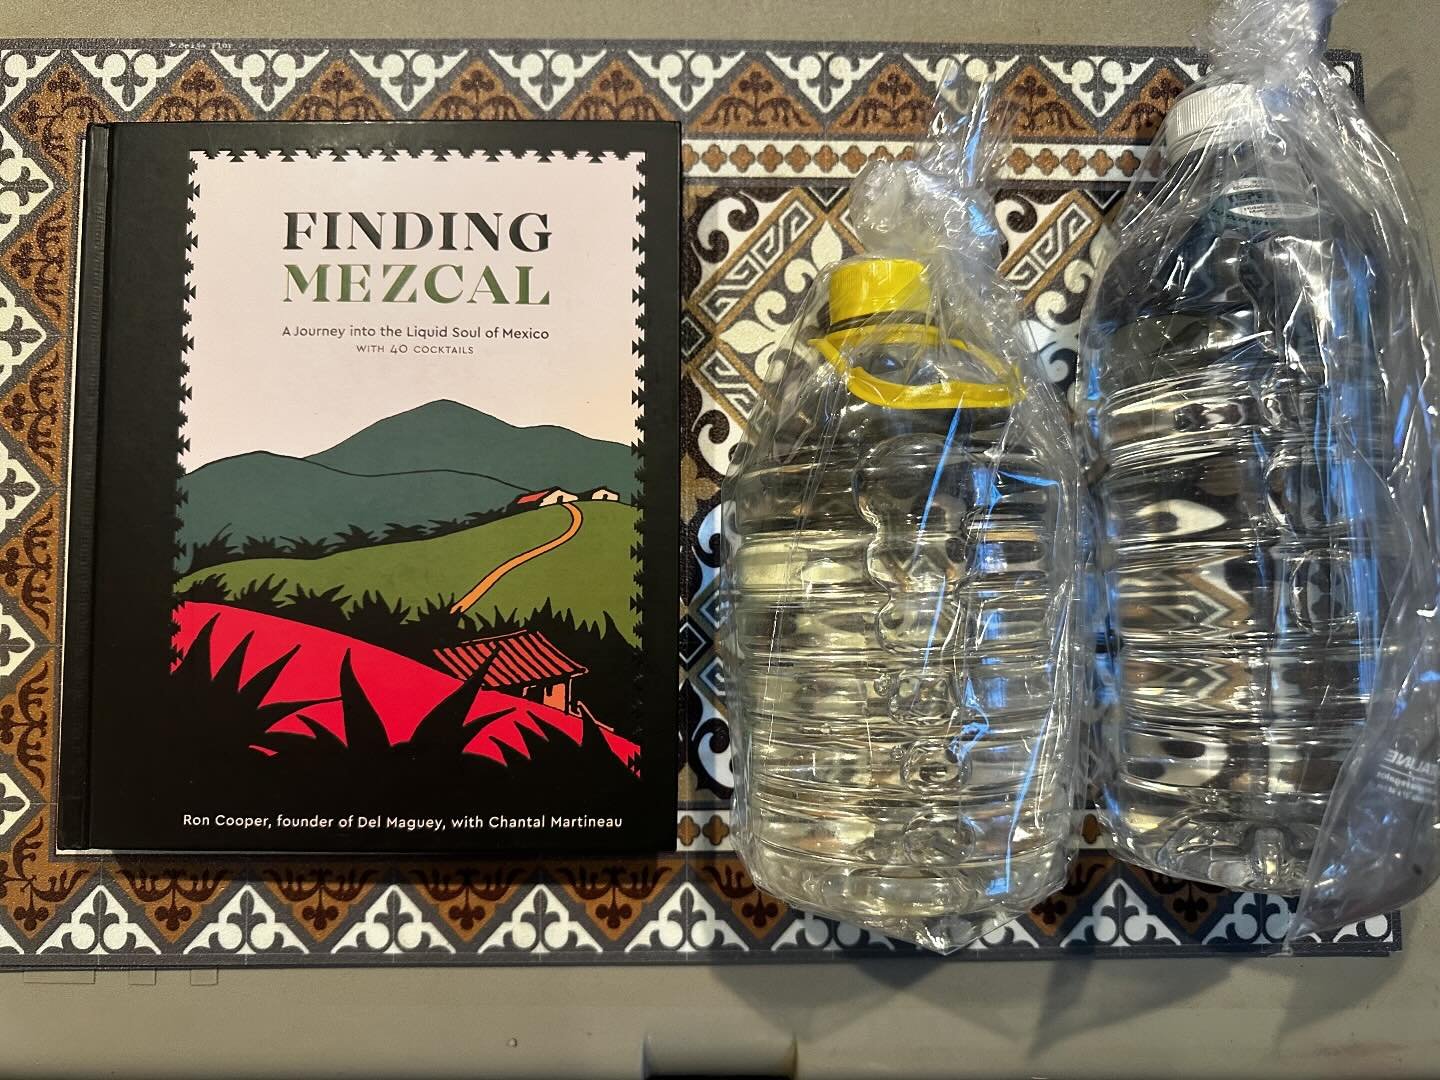 And now back to Oaxaca.  Get this book to understand the history and starting point of the blooming  Mezcal frenzy, and gain a respect for Mezcal culture and what could lie ahead as Mezcal becomes more and more sought after.  Accept no substitute- bu